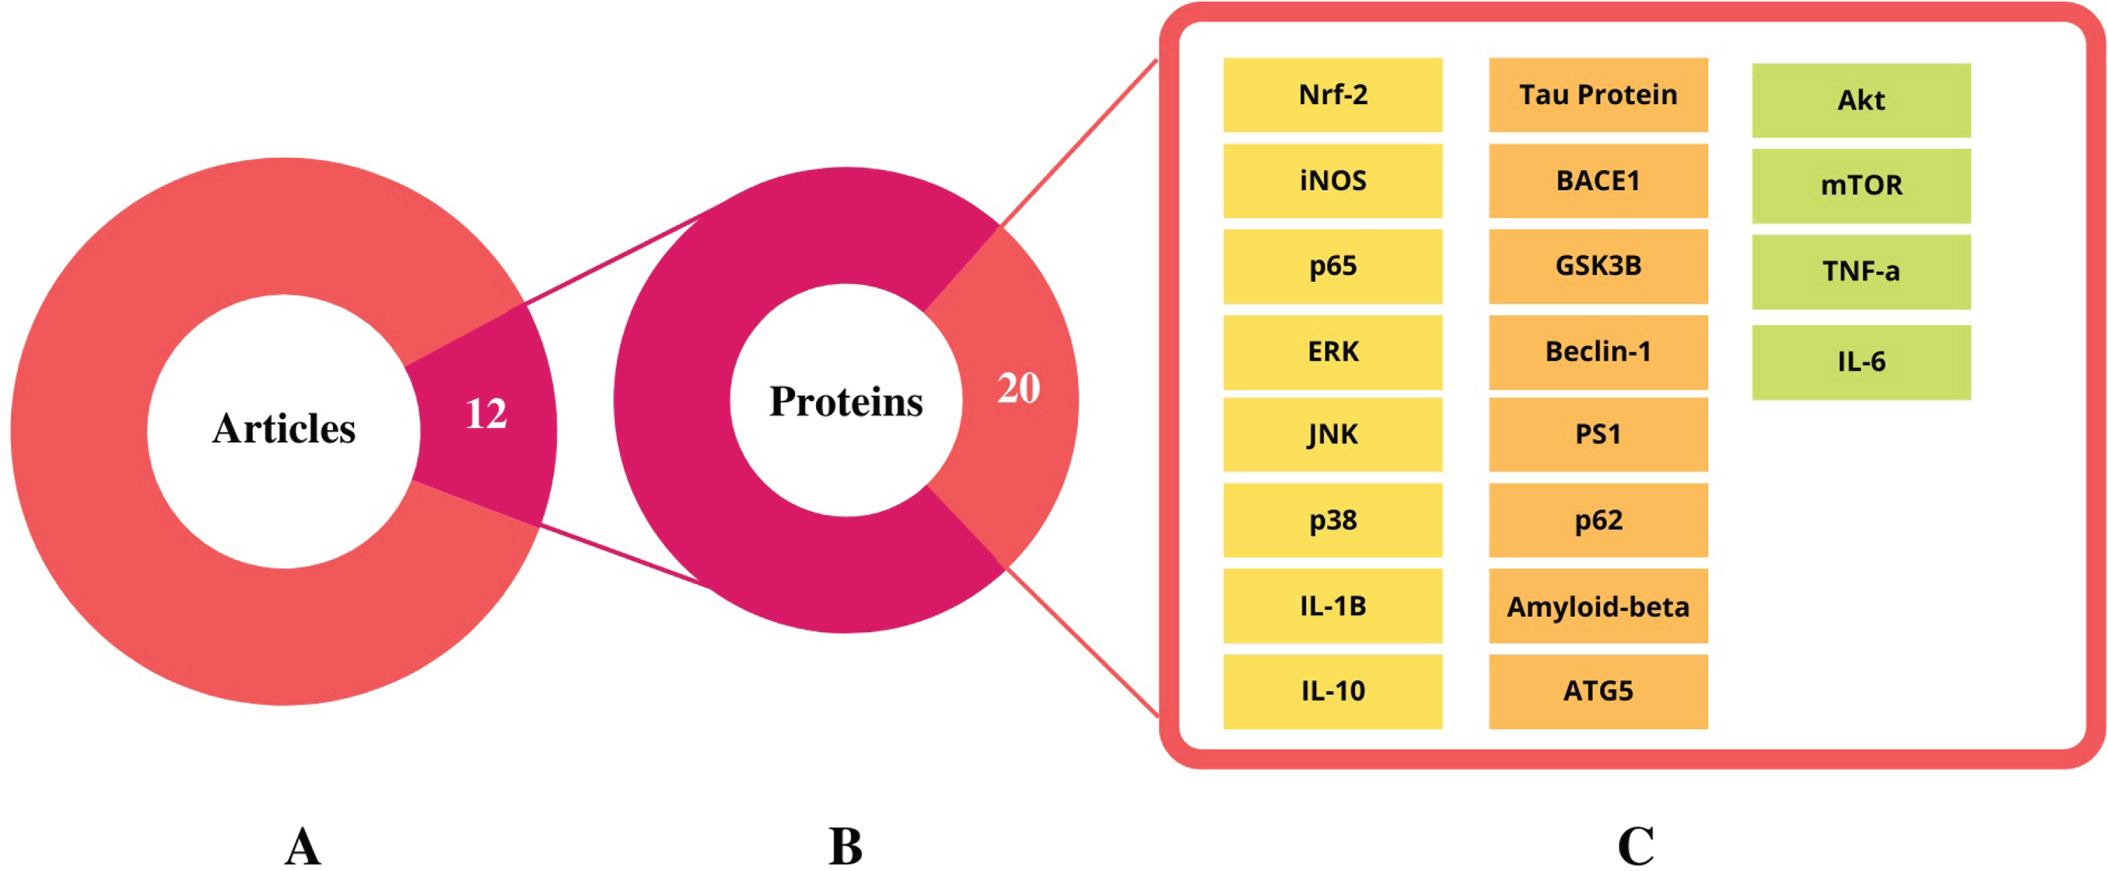 The summary of selected research articles and identified proteins. A) 14.5 % of the total articles (12 out of 83 articles) were selected based on the Alzheimer’s disease model. B) From the 12 independent research articles around 53 proteins were identified to play a role in Alzheimer’s disease. C) Only 38% of total proteins (20 out of 53 proteins) were shortlisted as they were present in more than two research articles. The list of shortlisted proteins used for further STRING, PANTHER, and KEGG analysis.